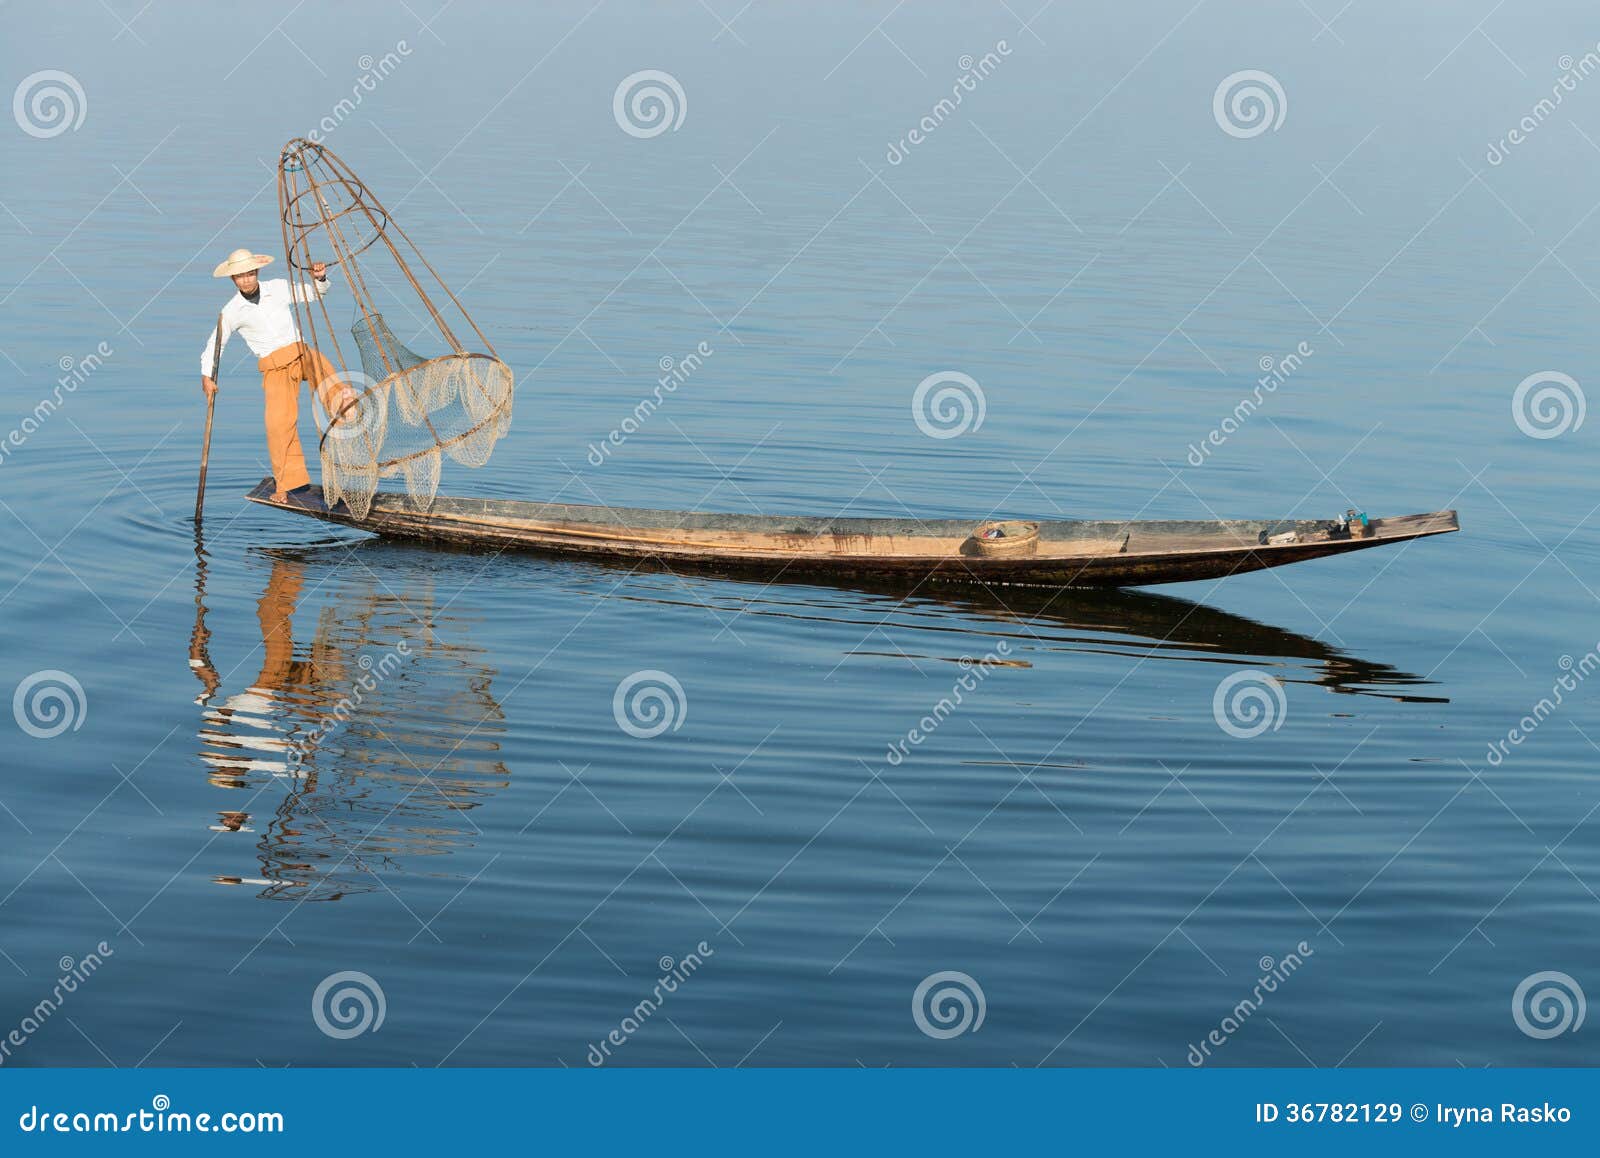 Fishing Nets Floating On The Sea On A Wood Stock Photo, Picture and Royalty  Free Image. Image 97131778.